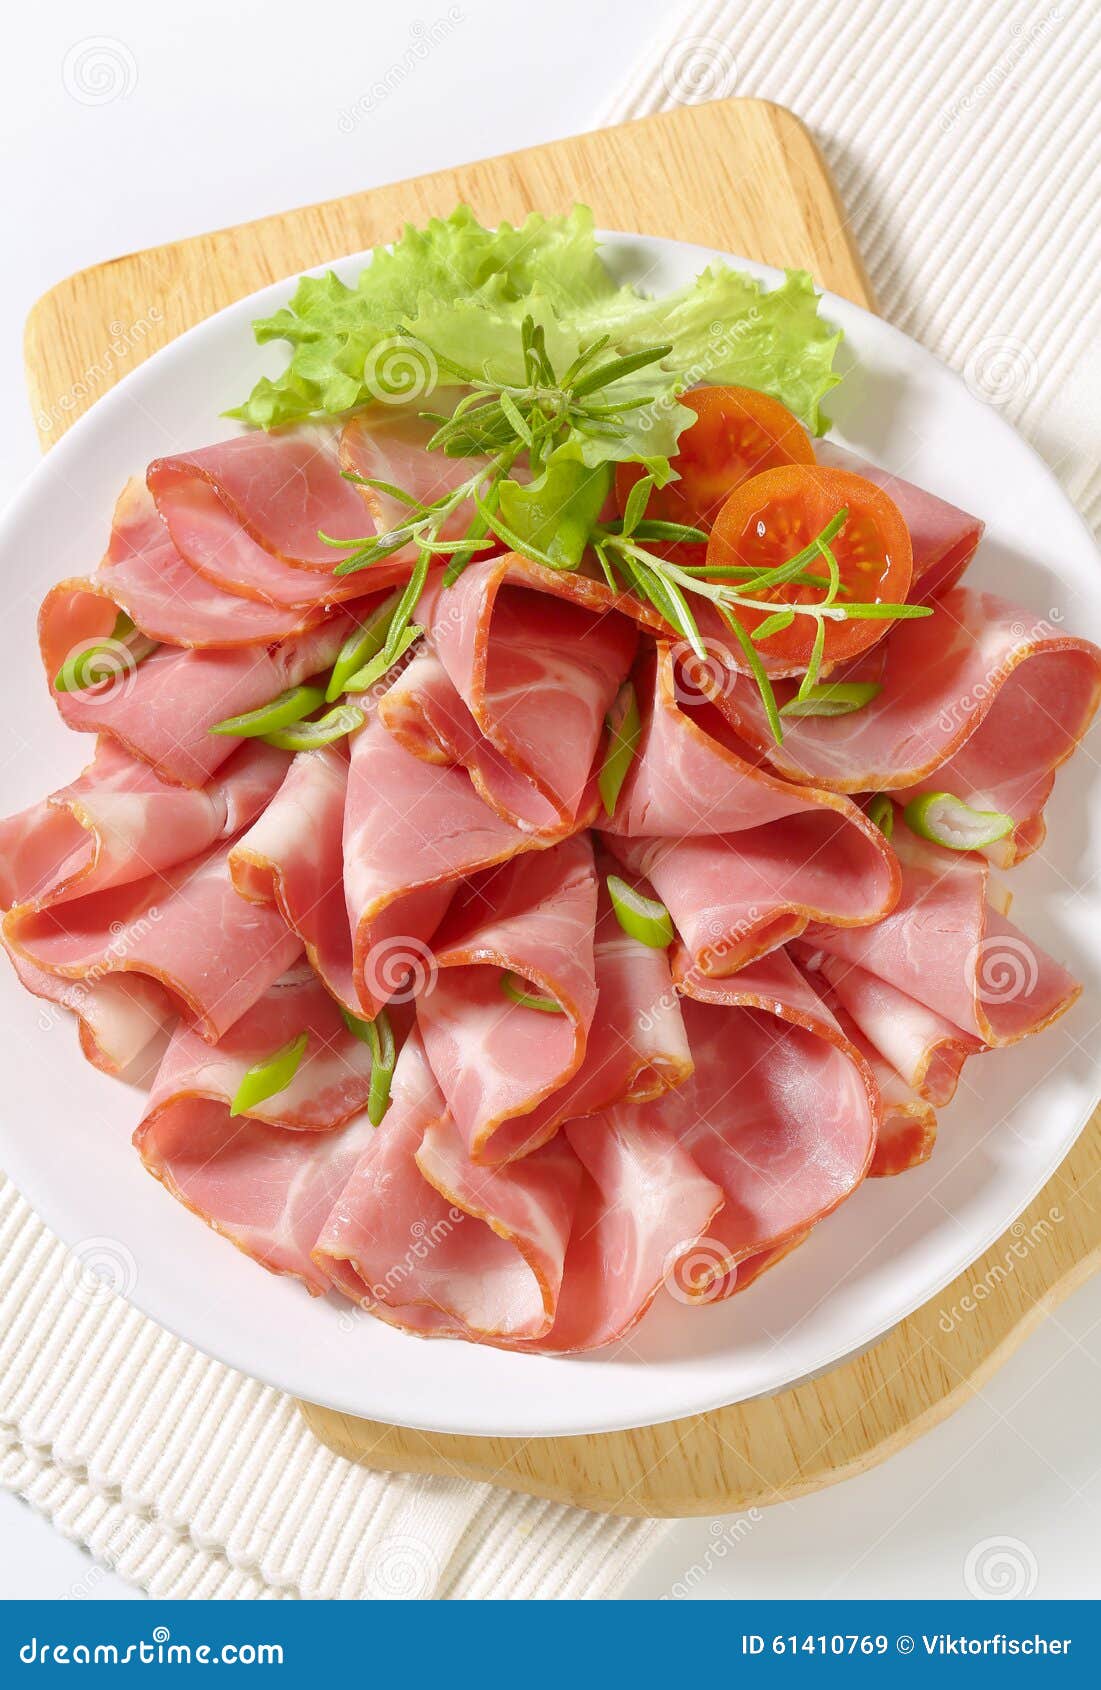 Slices of smoked pork neck stock image. Image of mottled - 61410769